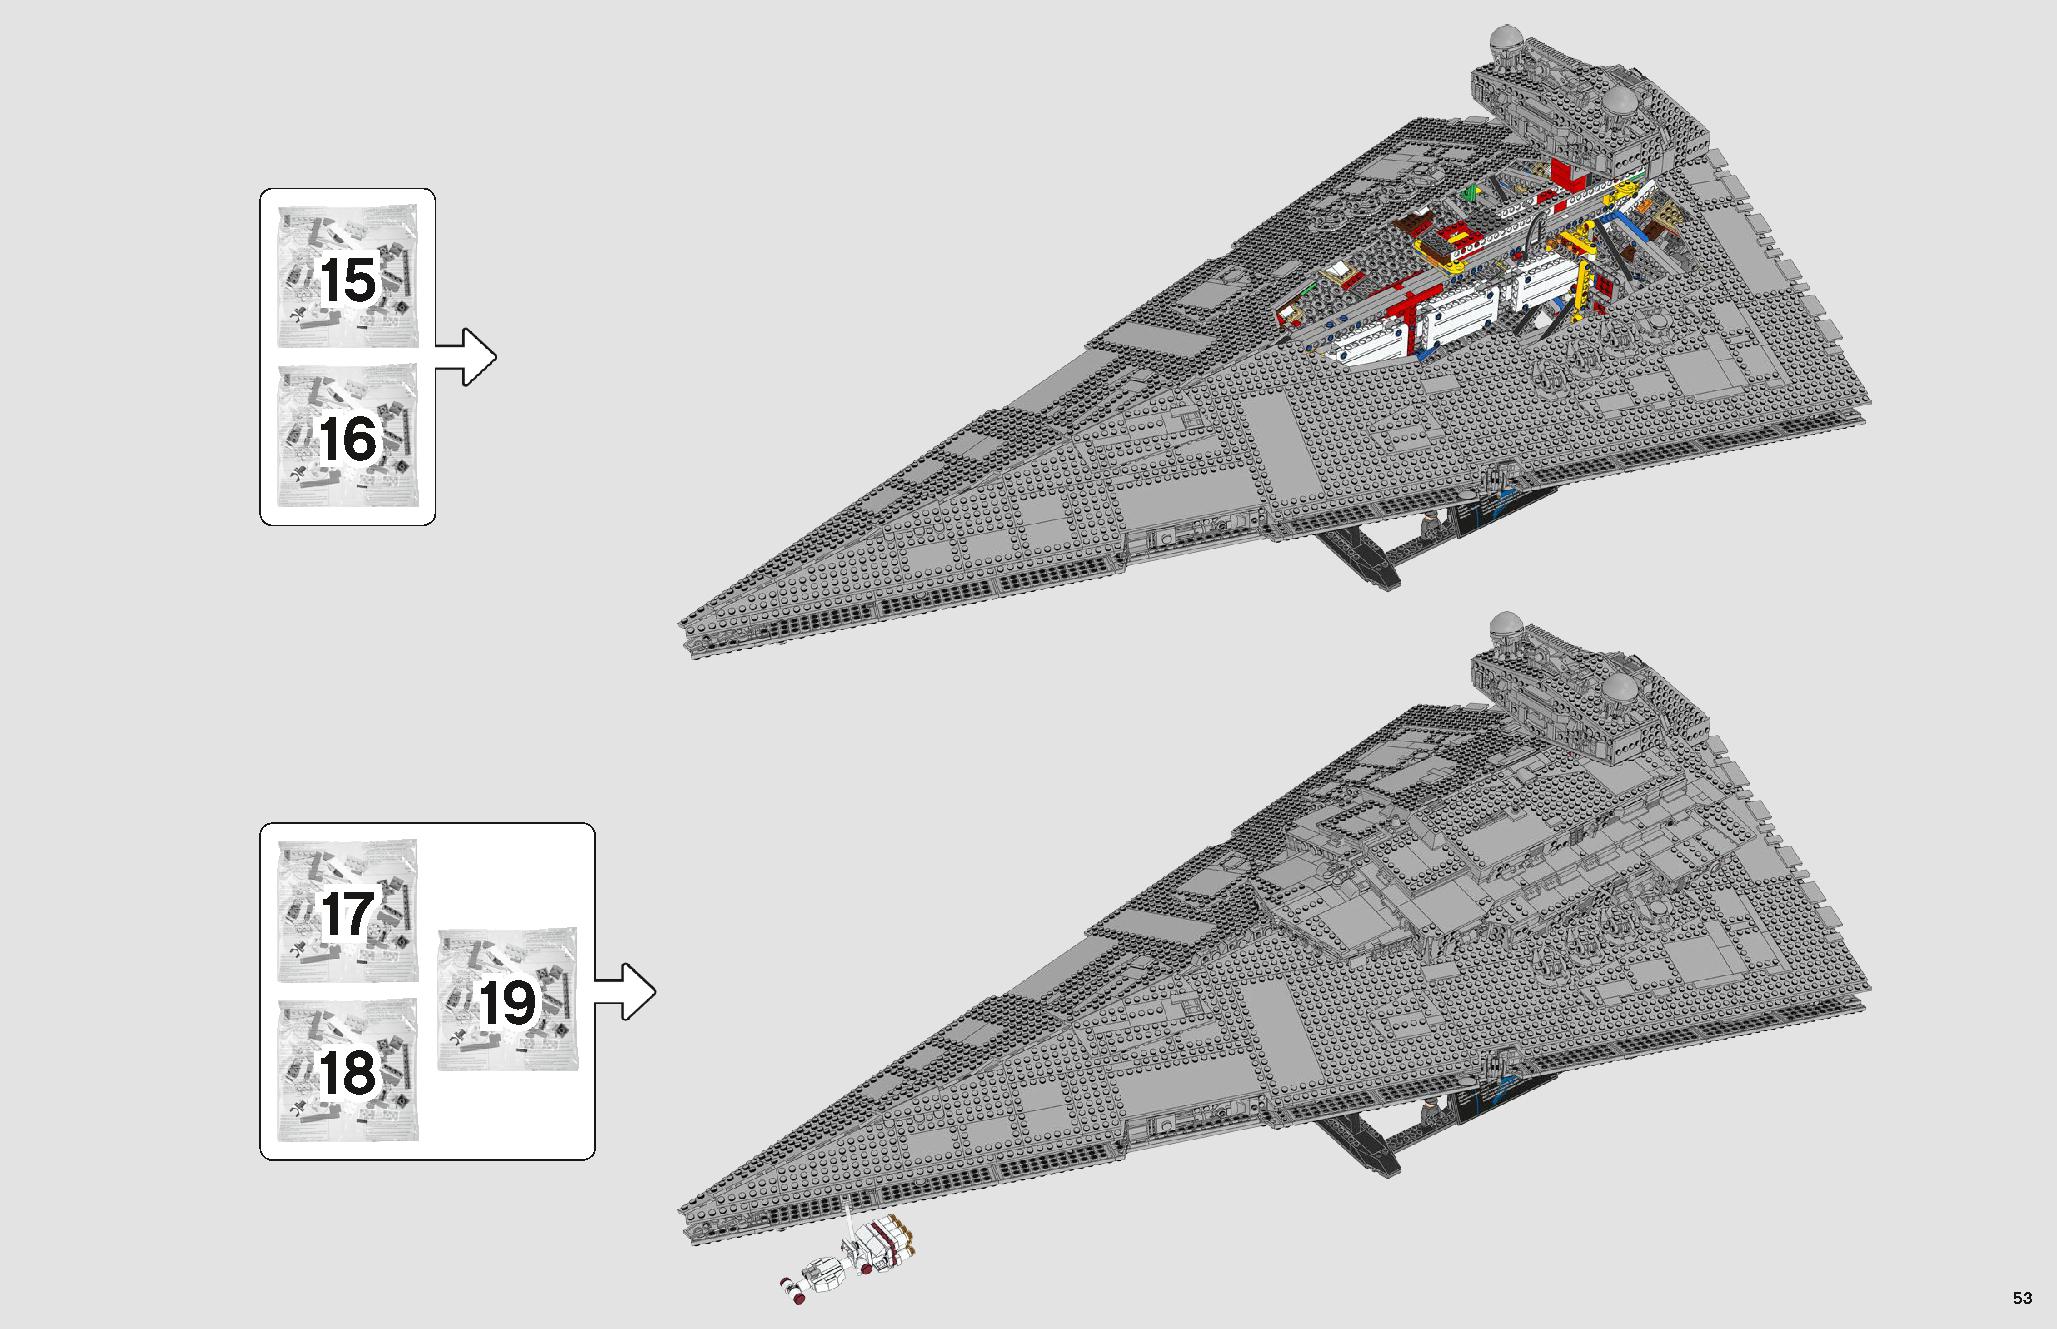 Imperial Star Destroyer 75252 レゴの商品情報 レゴの説明書・組立方法 53 page